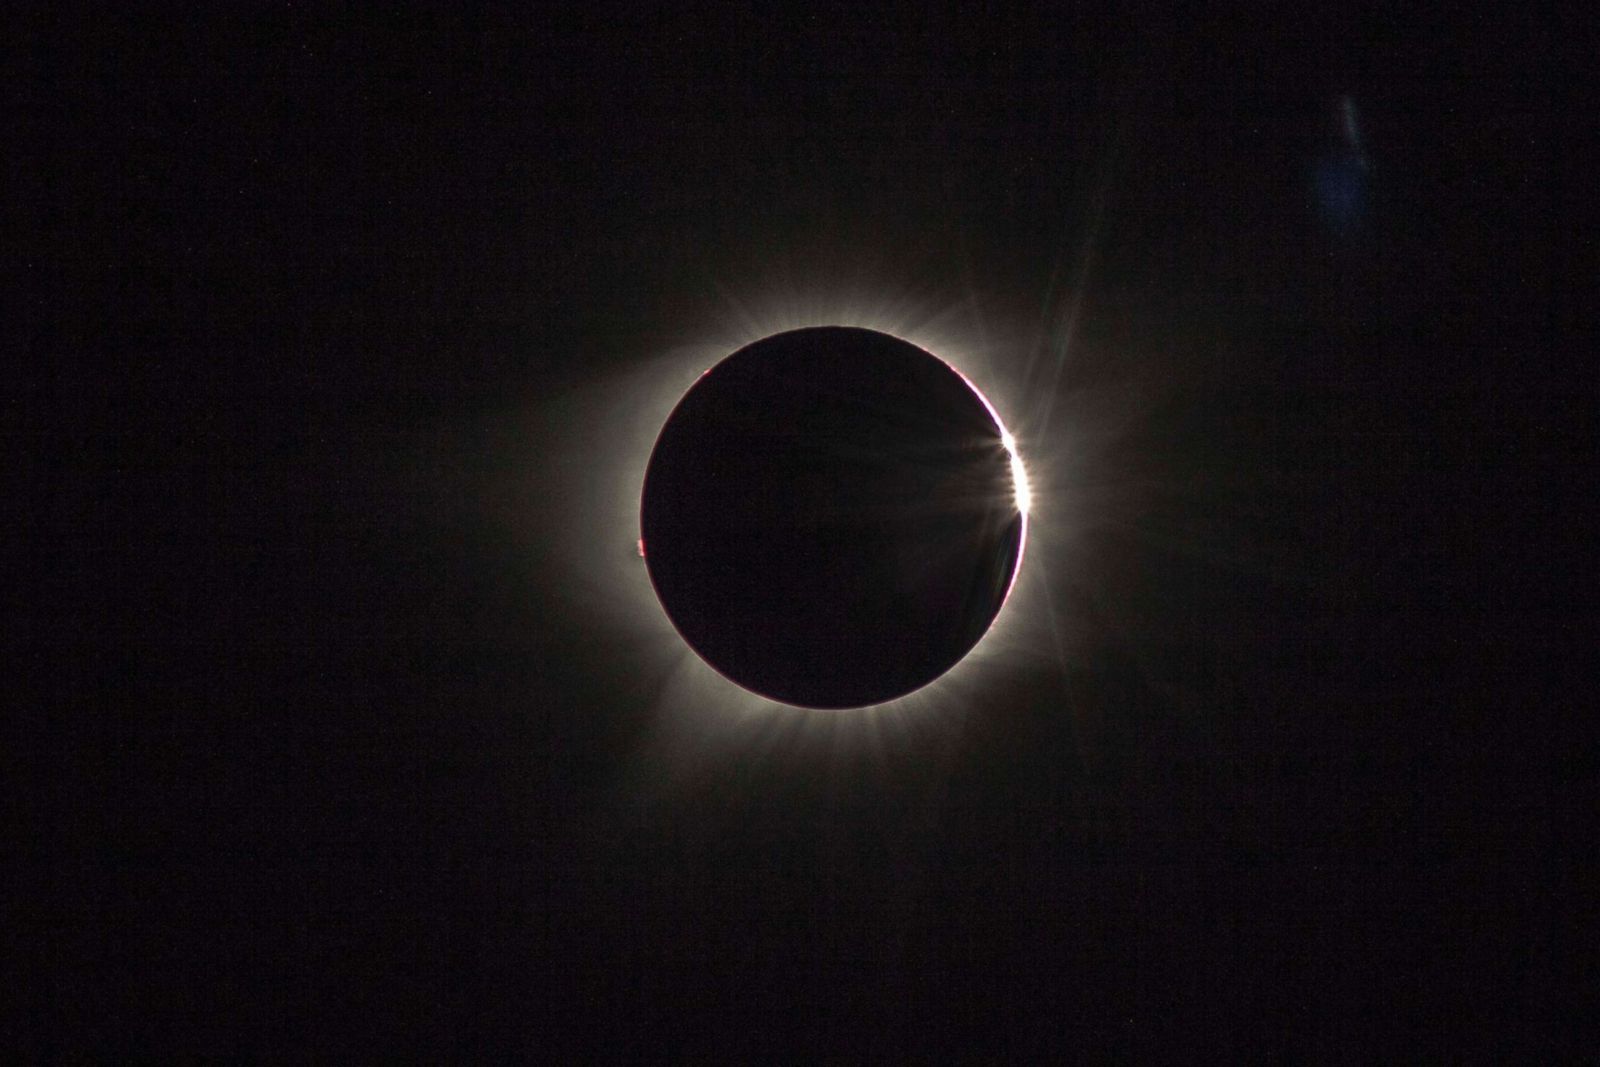 First look at the solar eclipse from Oregon Photos Image 21 ABC News